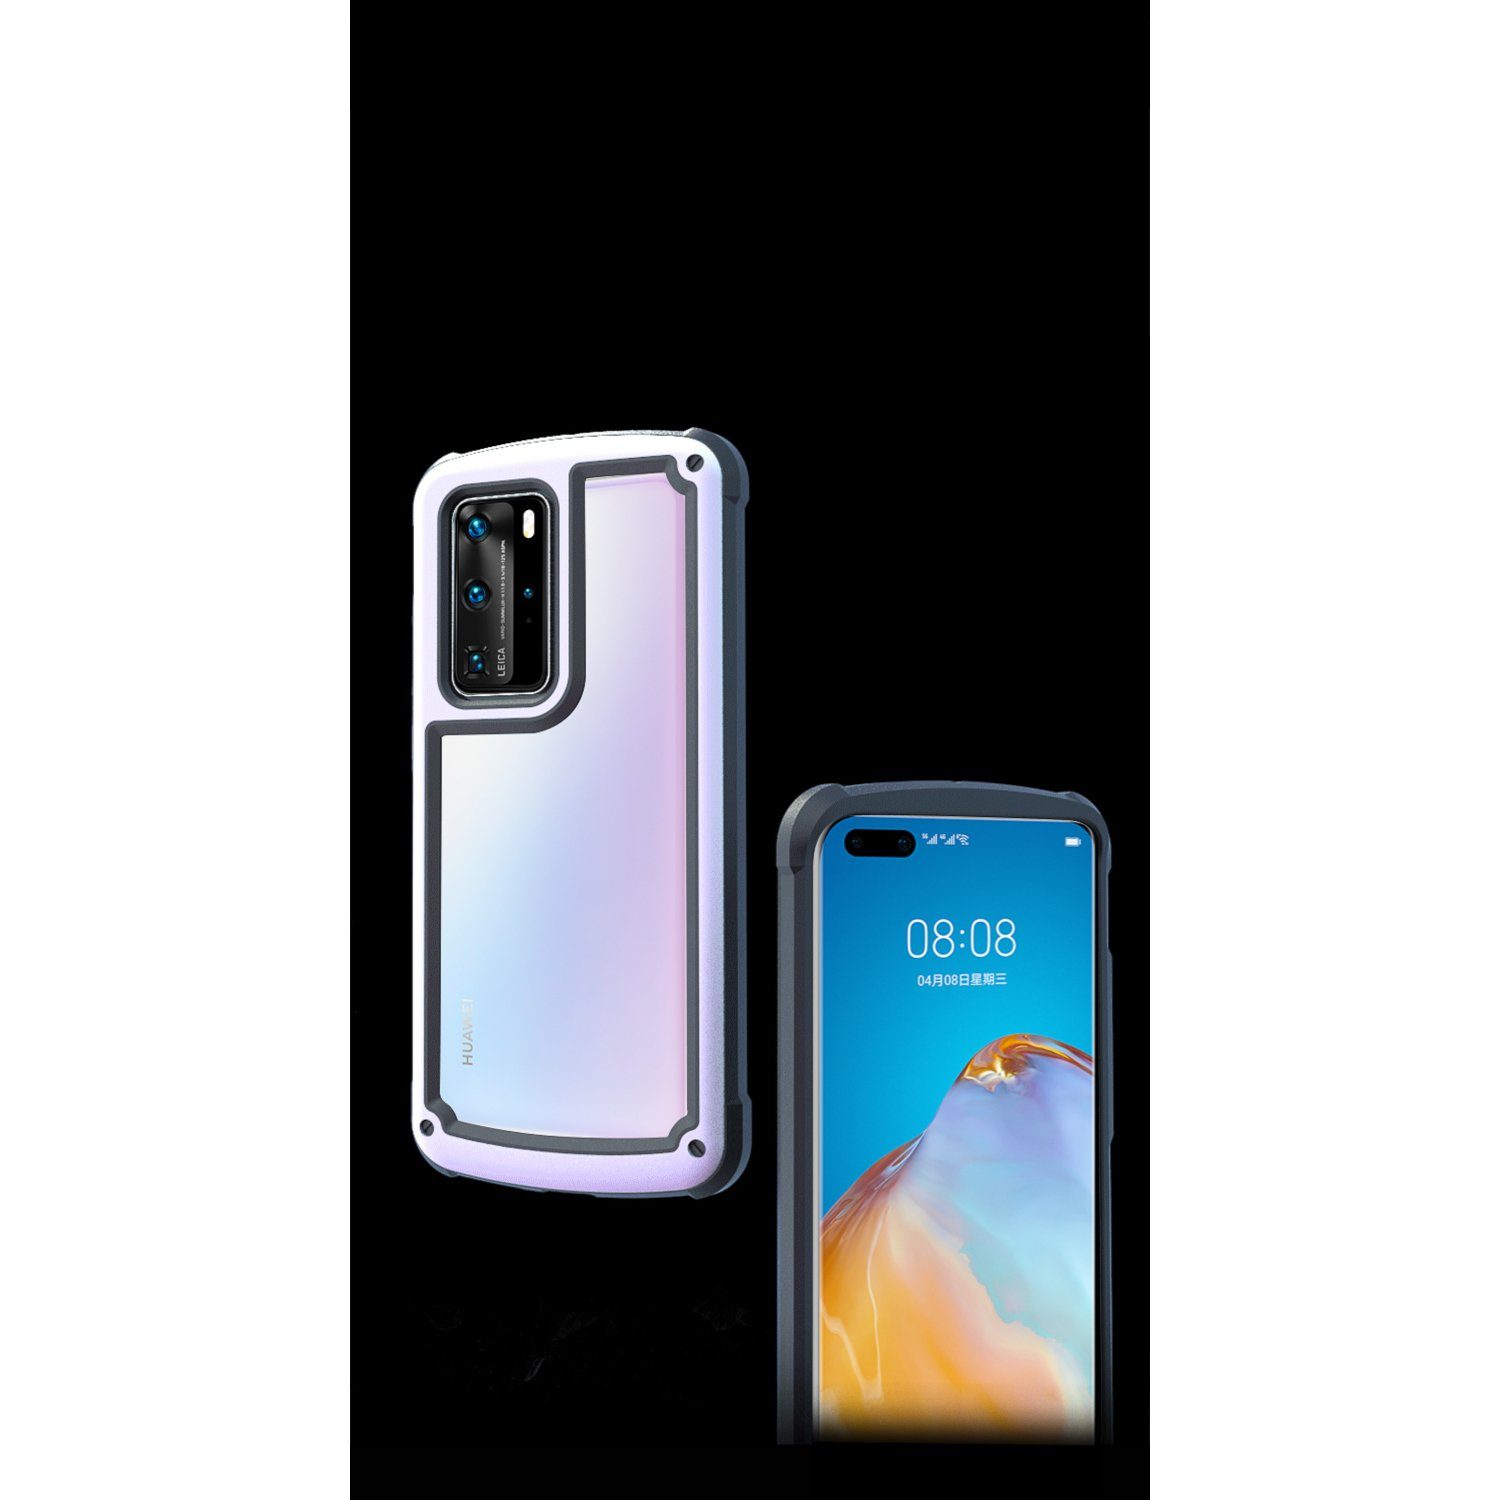 ROOT CO. Gravity Shock Resist Case for Huawei P40 Pro, Matte White Default ROOT CO. 